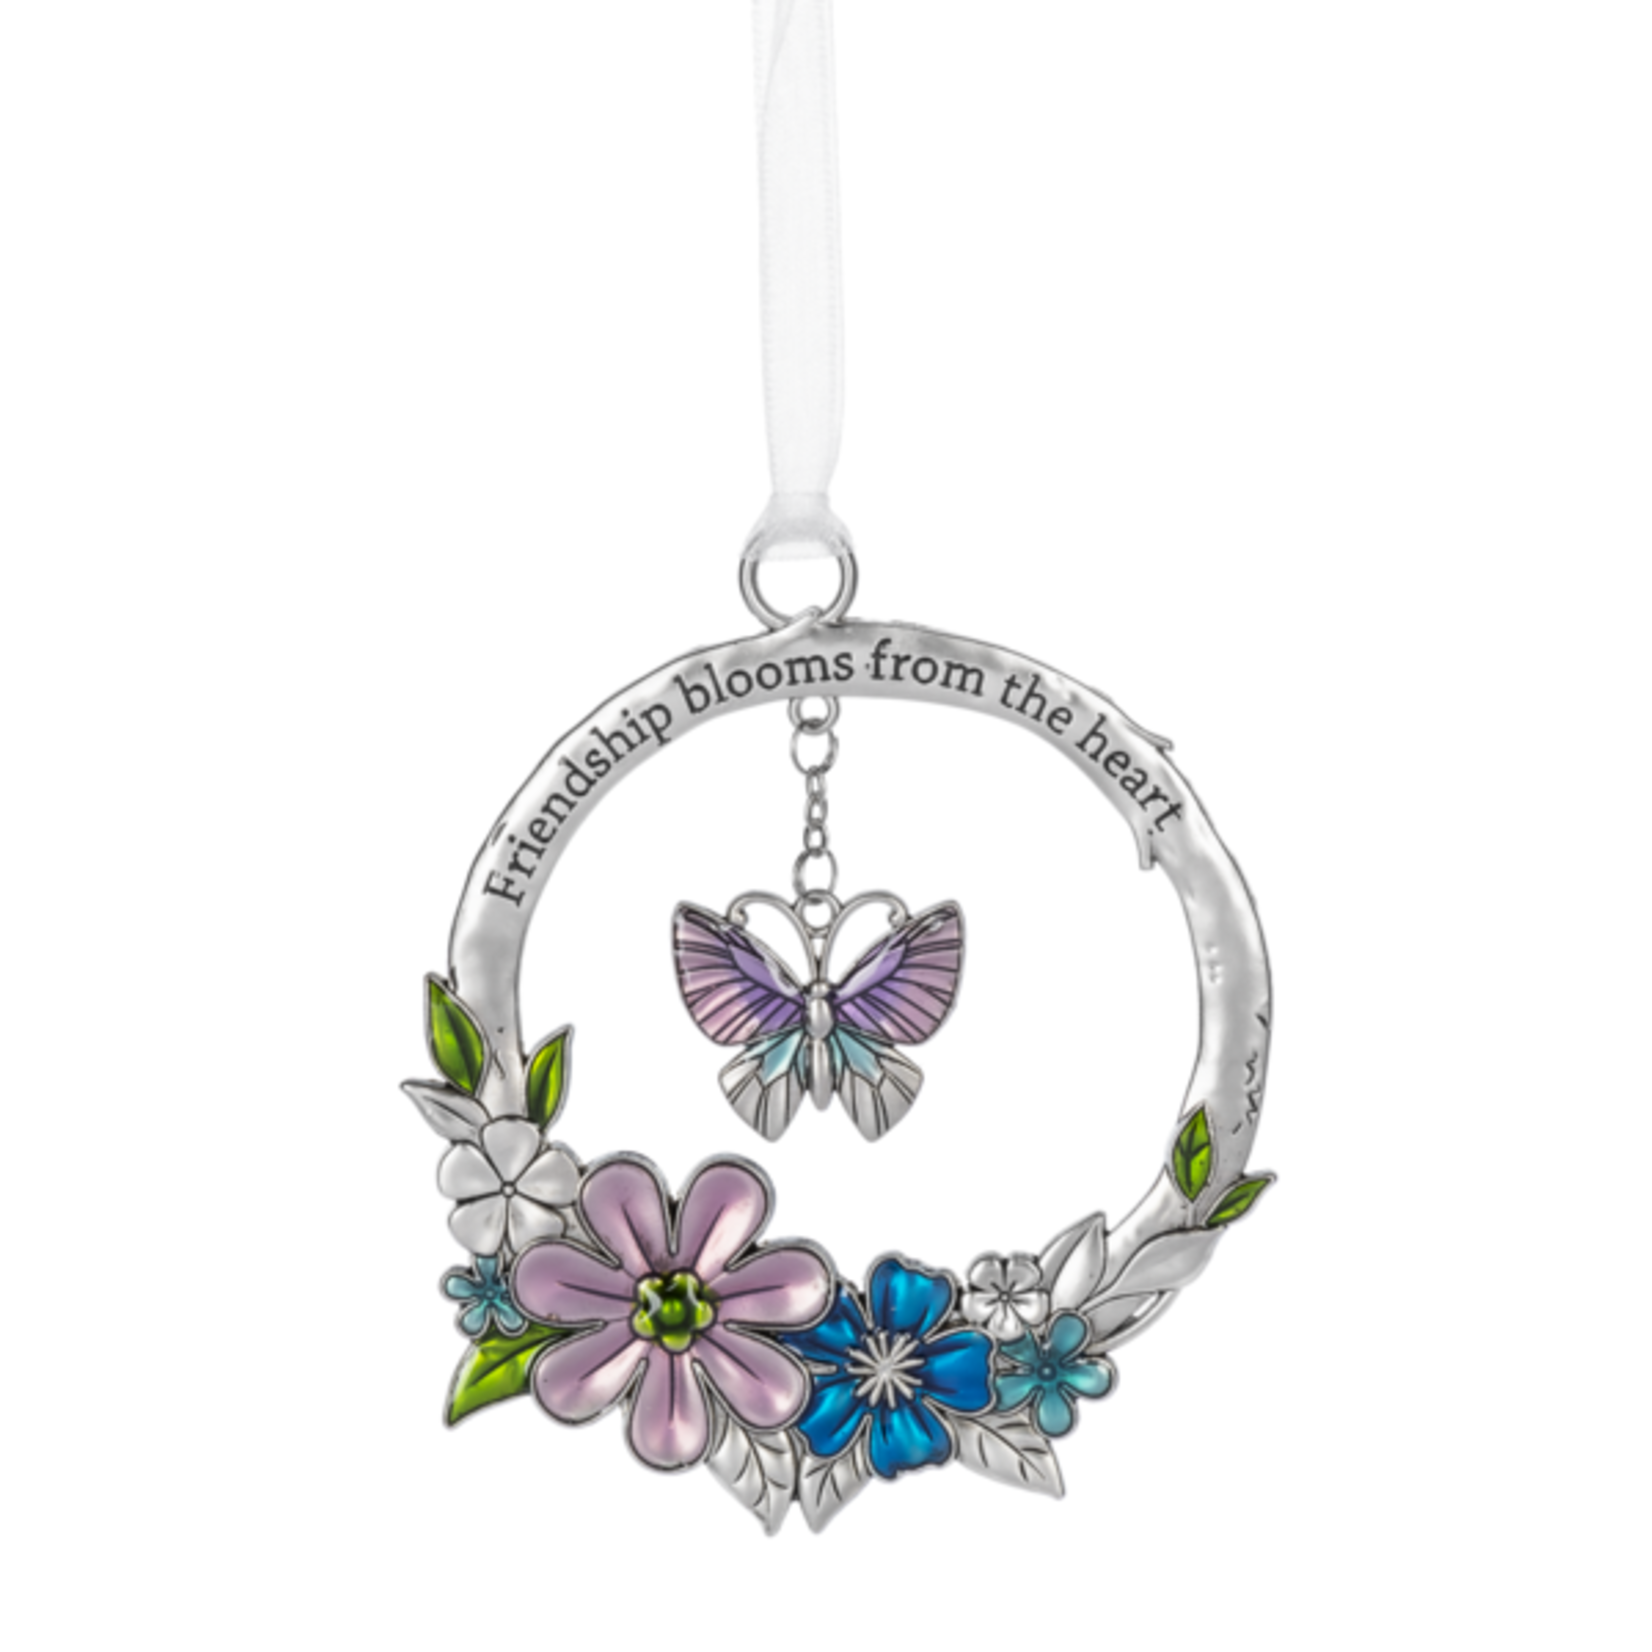 Friendship blooms from the heart Ornament